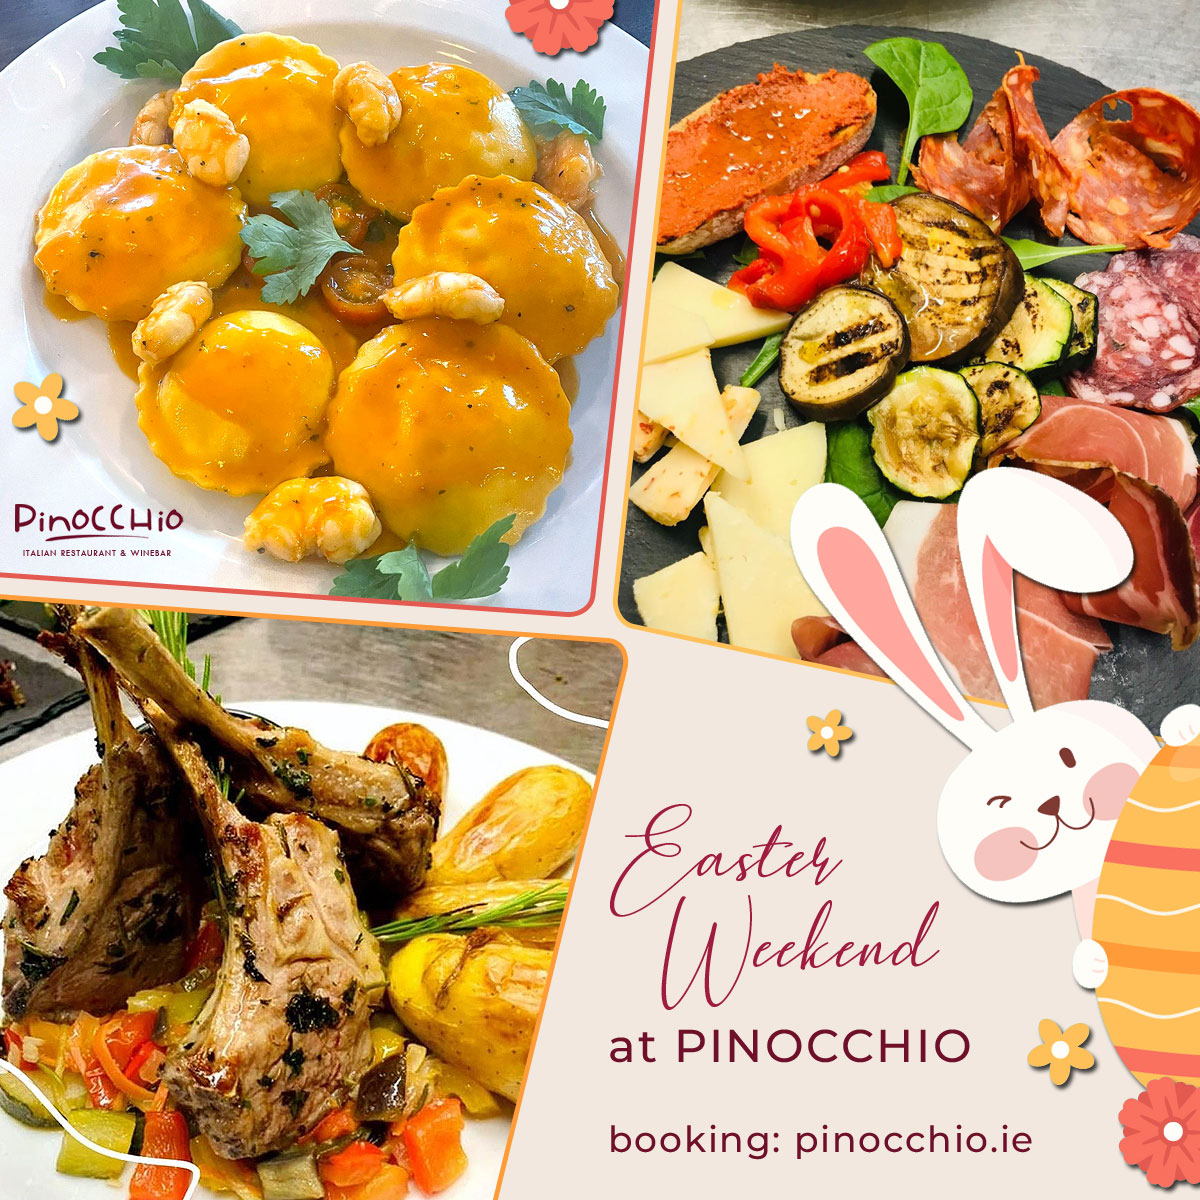 🐰🐣🌸🍫 #Easter is getting closer! 🤩 Choose Pinocchio for a special treat to yourself and your loved ones ❤, BOOK a table now: 👉 pinocchio.ie/contact-us ☎️ 01 671 9524 📧 pinocchiotemplebar@flavourofitaly.net #easterlunch #happyeaster #restaurant #pinocchiorestaurant #dinner